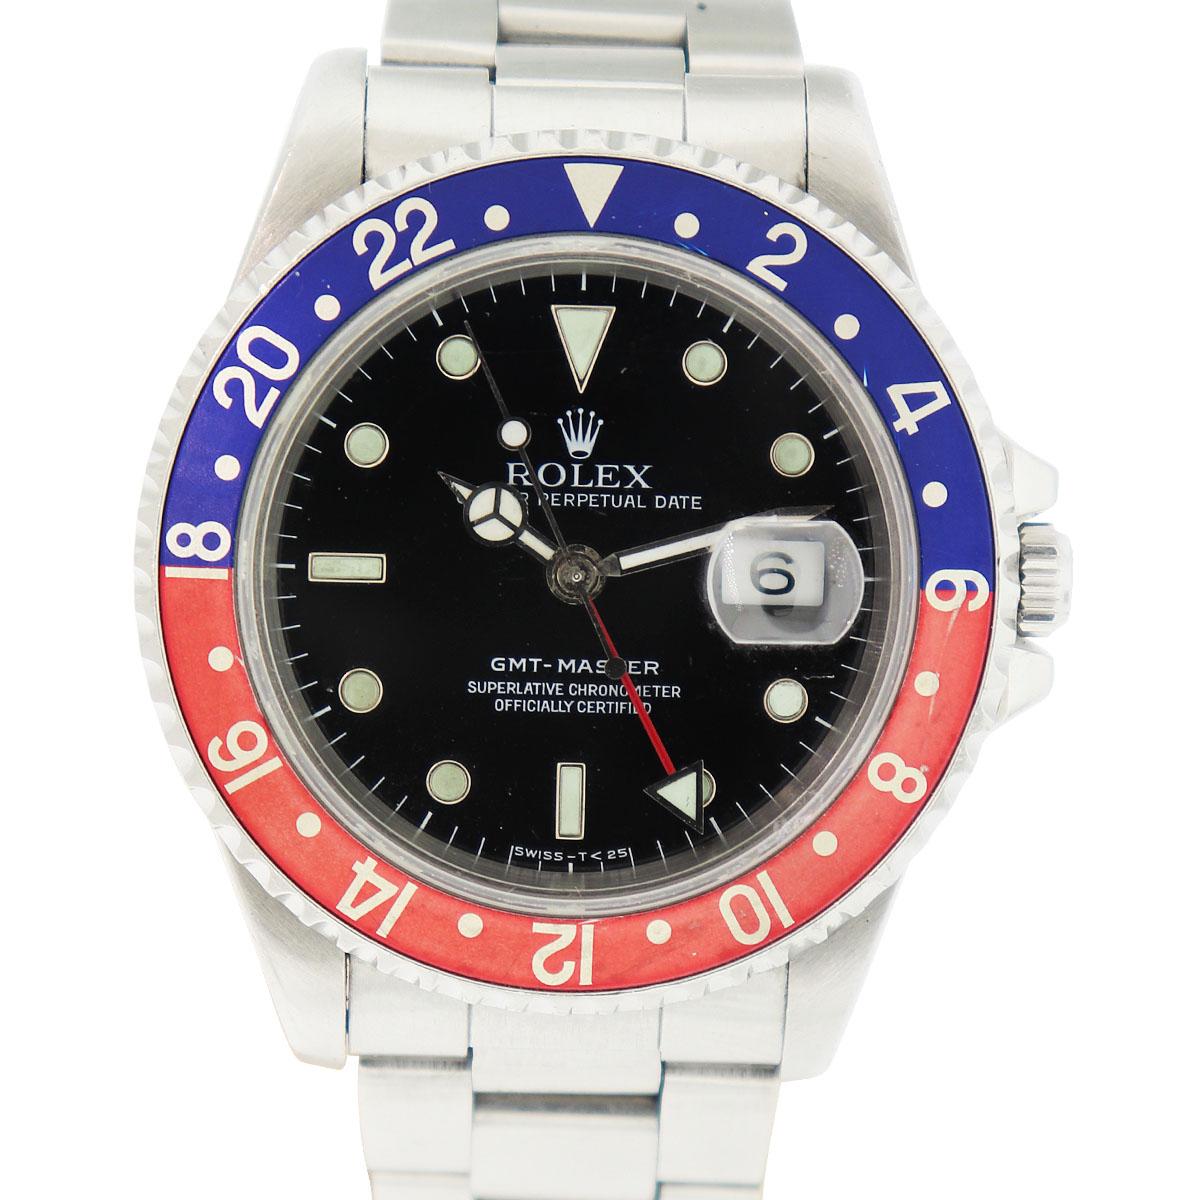 Elevate your wrist game with the iconic Rolex 16700 GMT Master 'Pepsi.' This stainless steel masterpiece features a striking black dial with silver hands, while the signature red and blue bezel sets it apart. With precise automatic movement and a